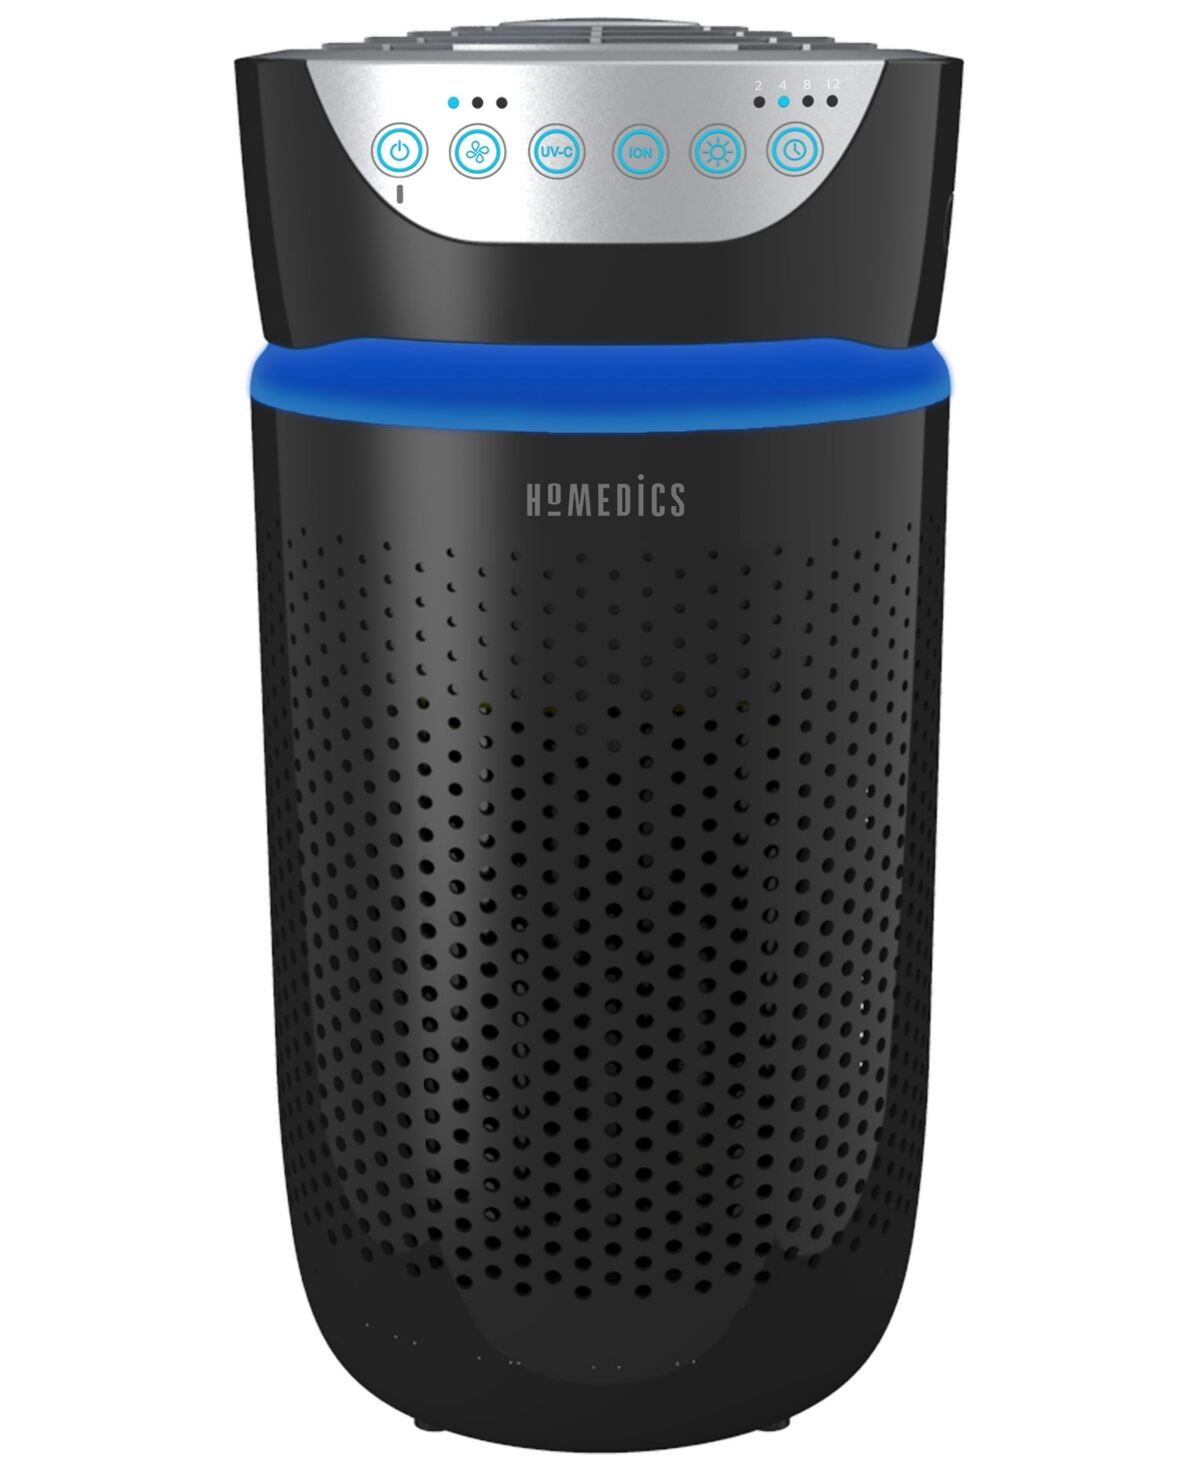 Homedics TotalClean 5-in-1 Tower Air Purifier with Uv-c Light - Black